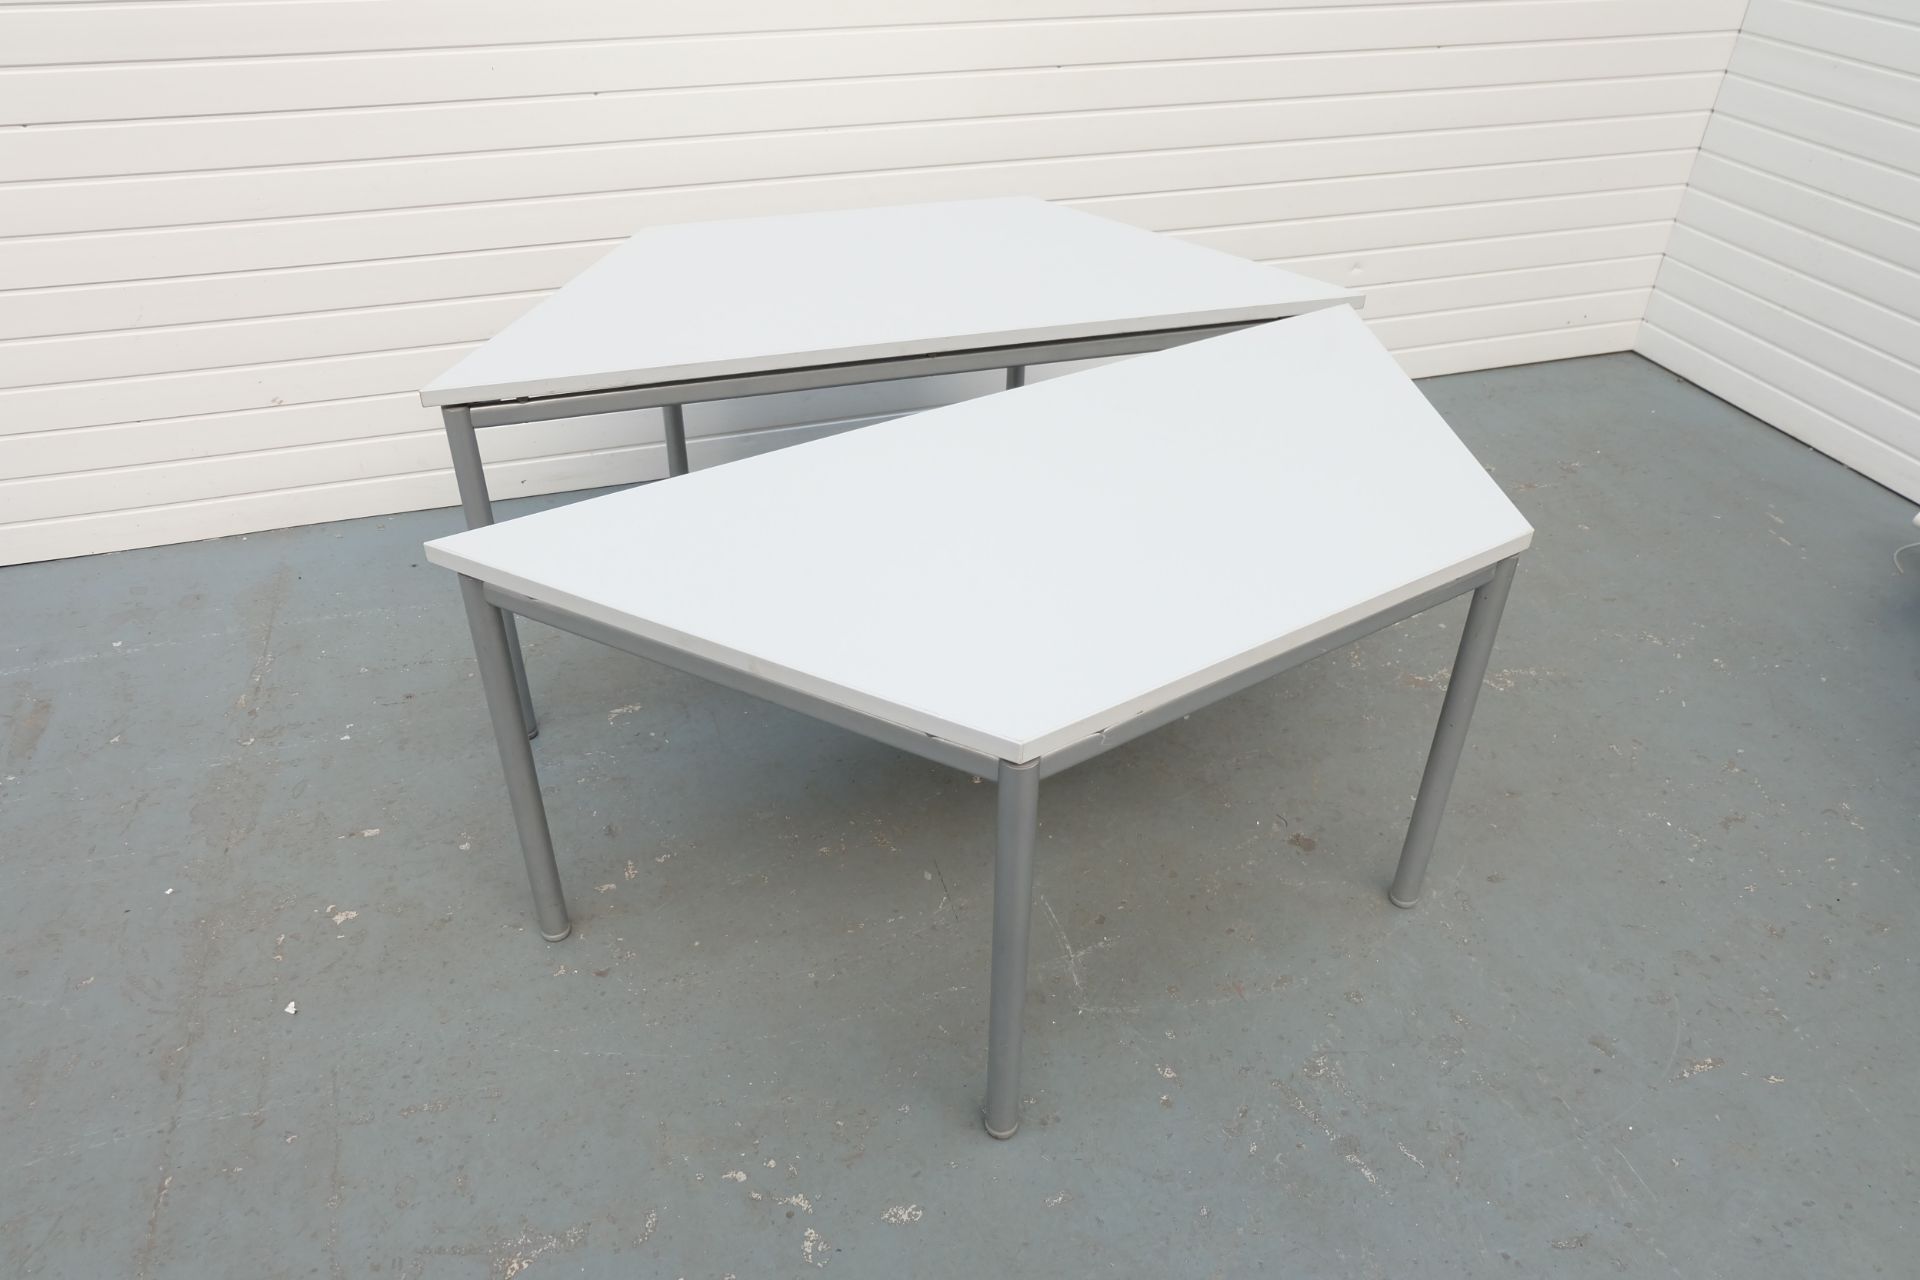 Two Part Hexagonal Table With Adjustable Feet. Size 1600mmx 690mm x 680mm High. - Image 3 of 3